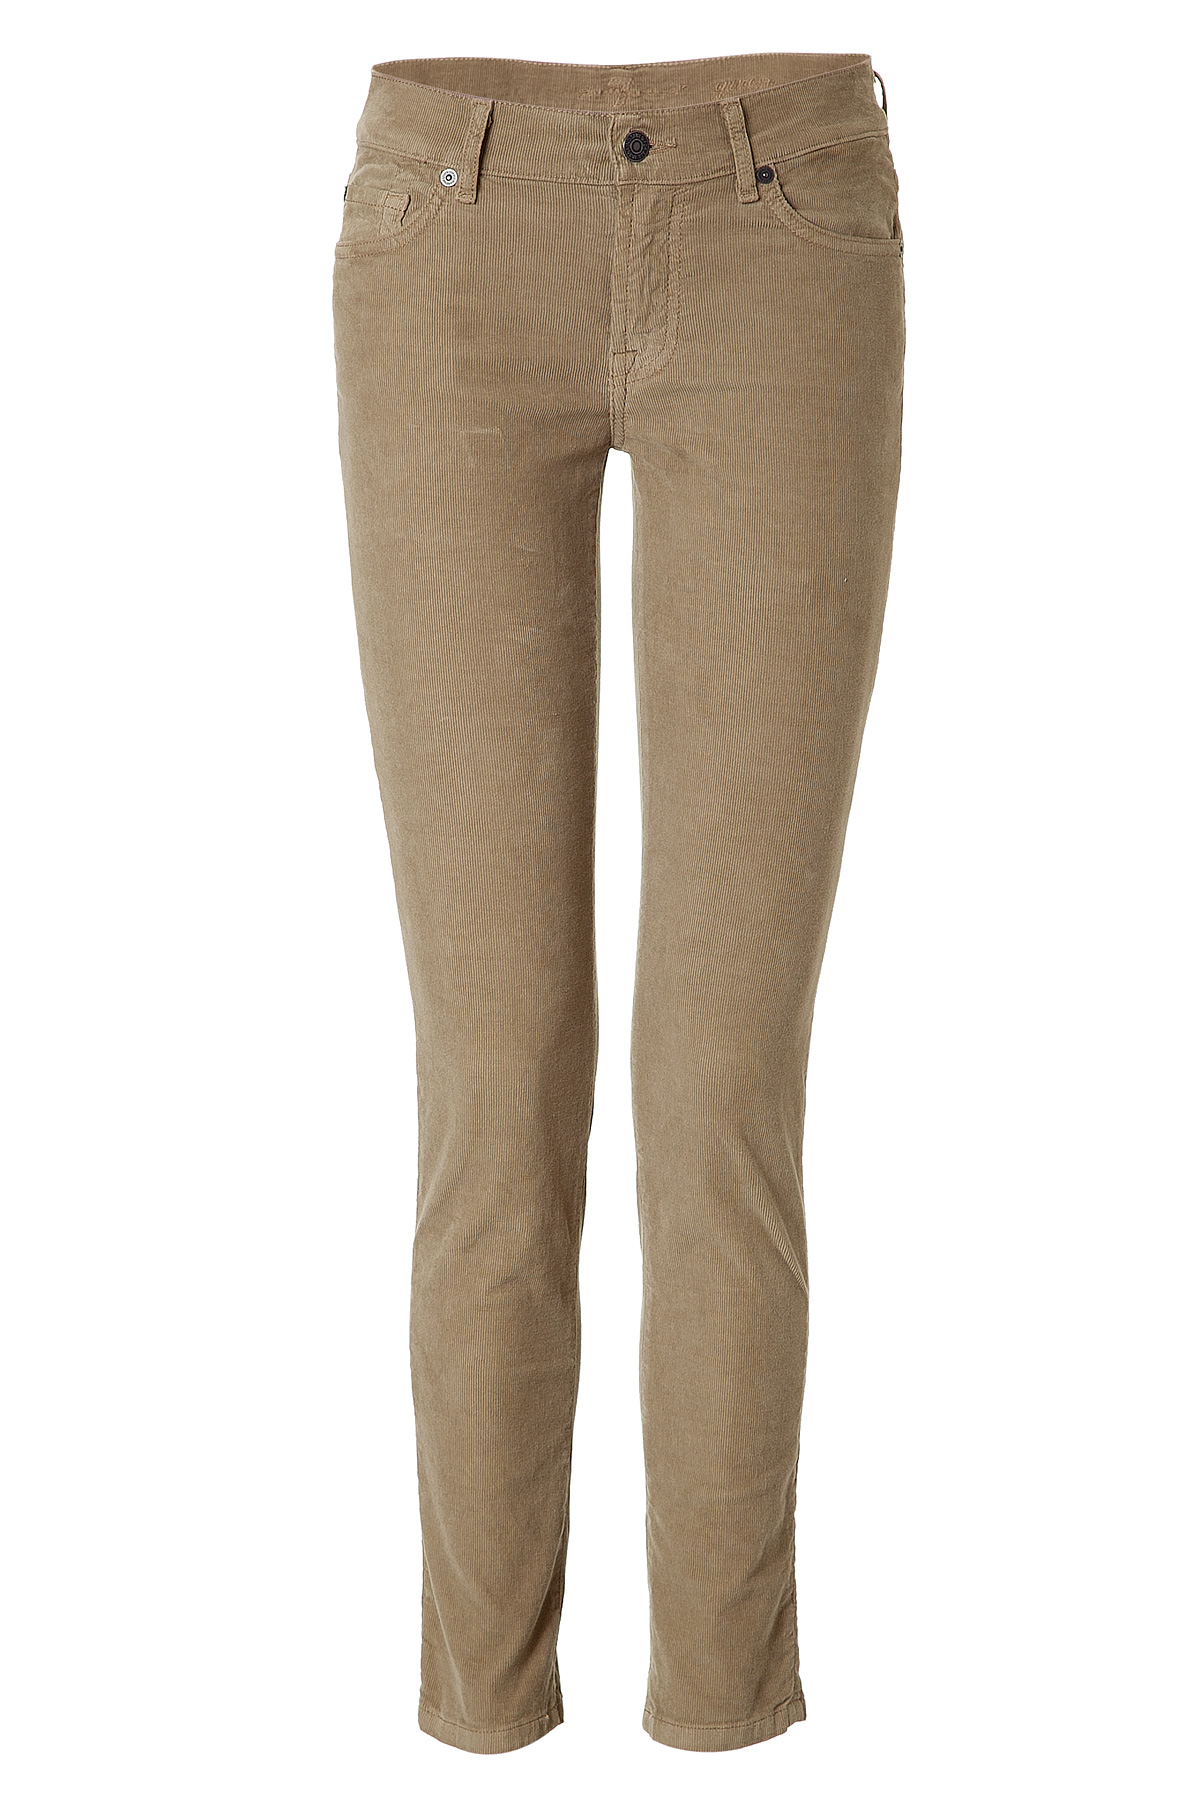 7 For All Mankind The Gwenevere Pistachio Super Skinny Corduroy Pants ...